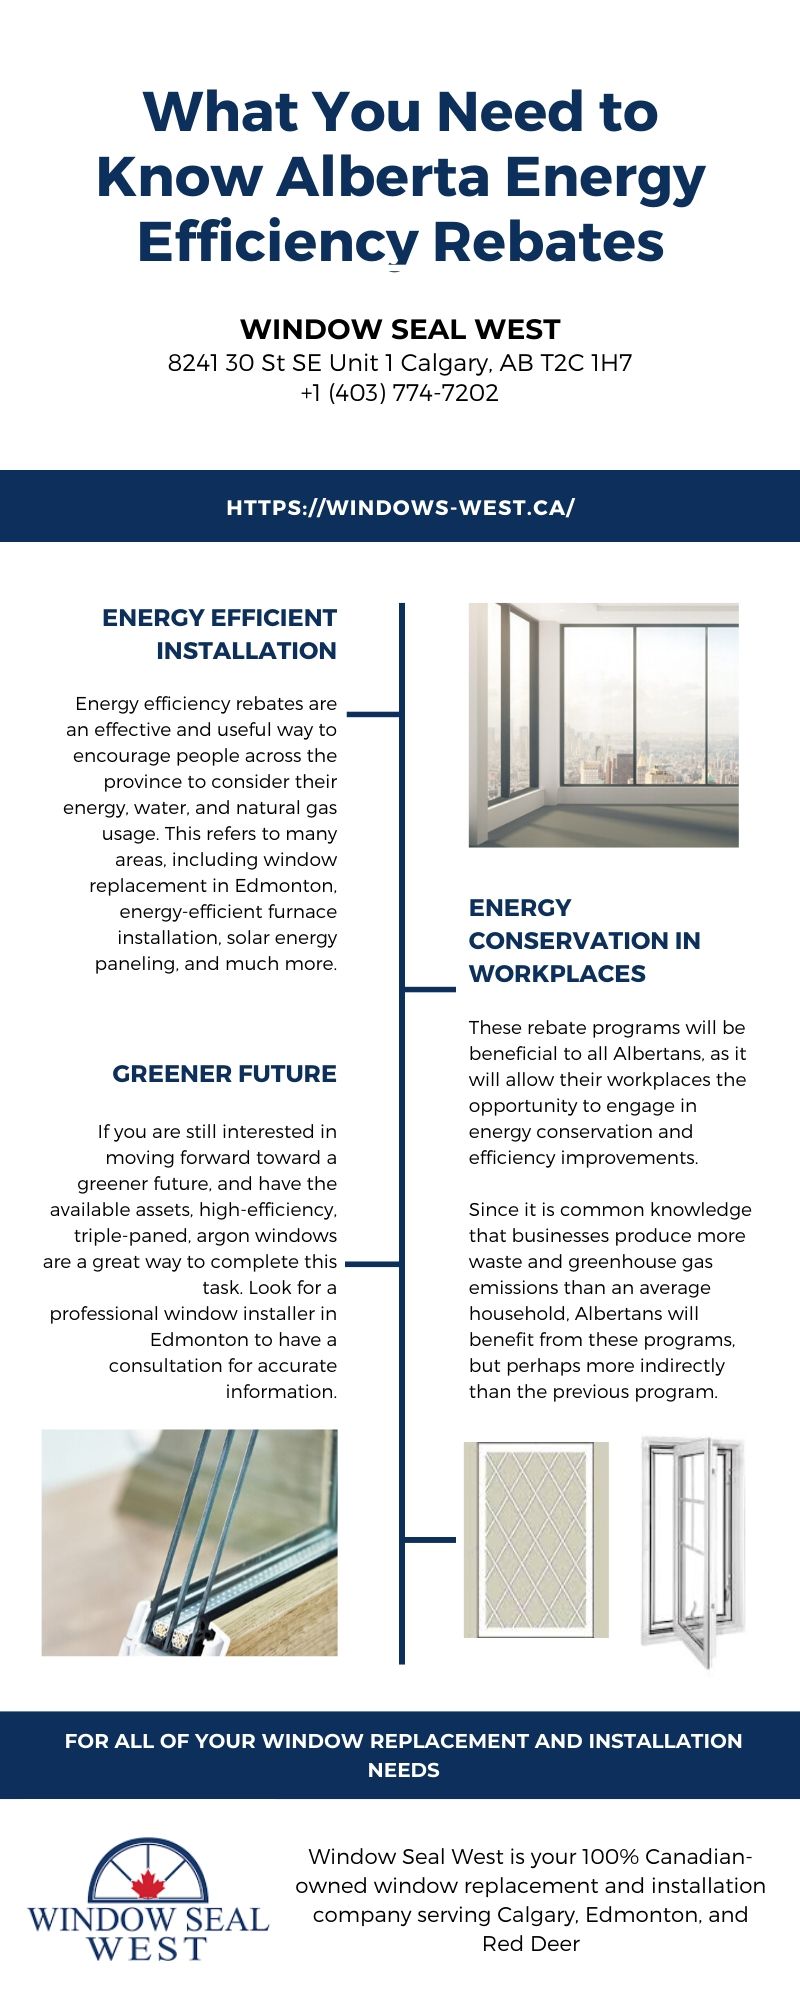 what-you-need-to-know-alberta-energy-efficiency-rebates-infographic-gifyu